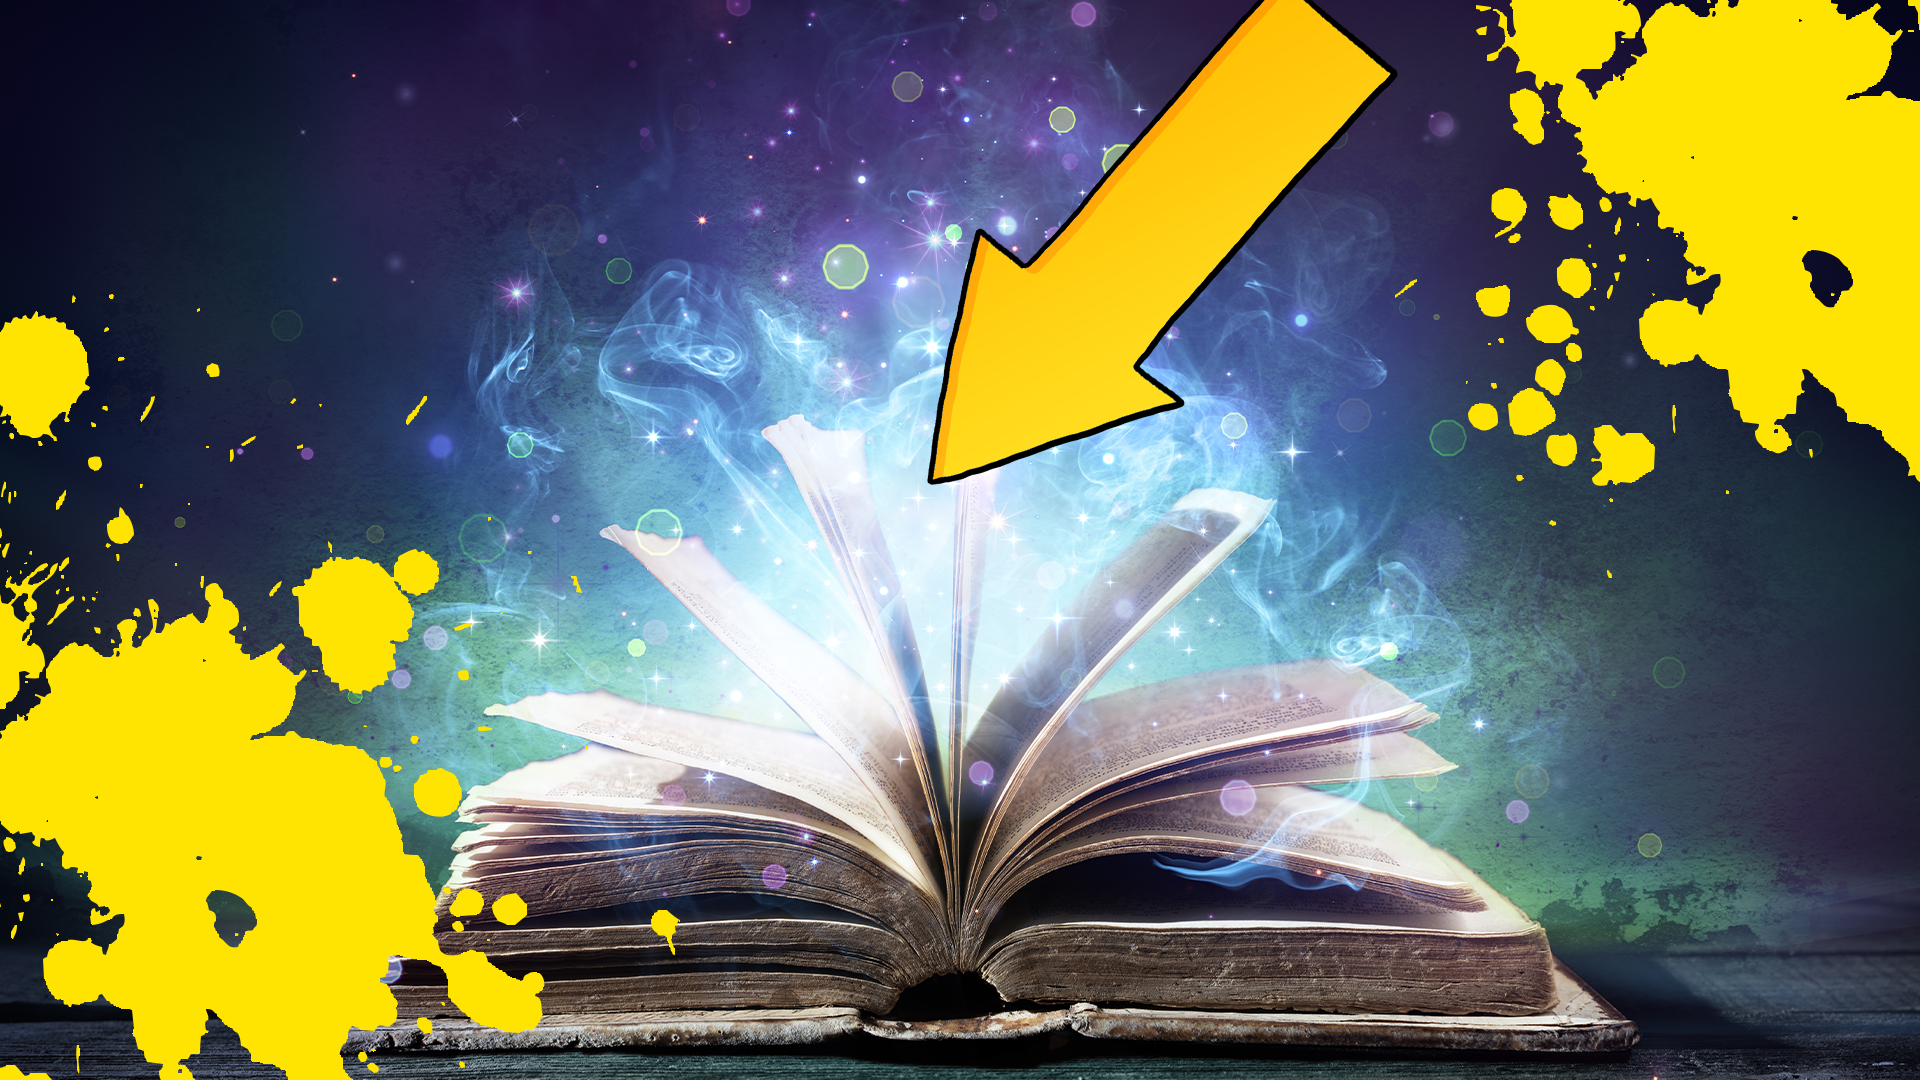 Magical book with splats and arrow